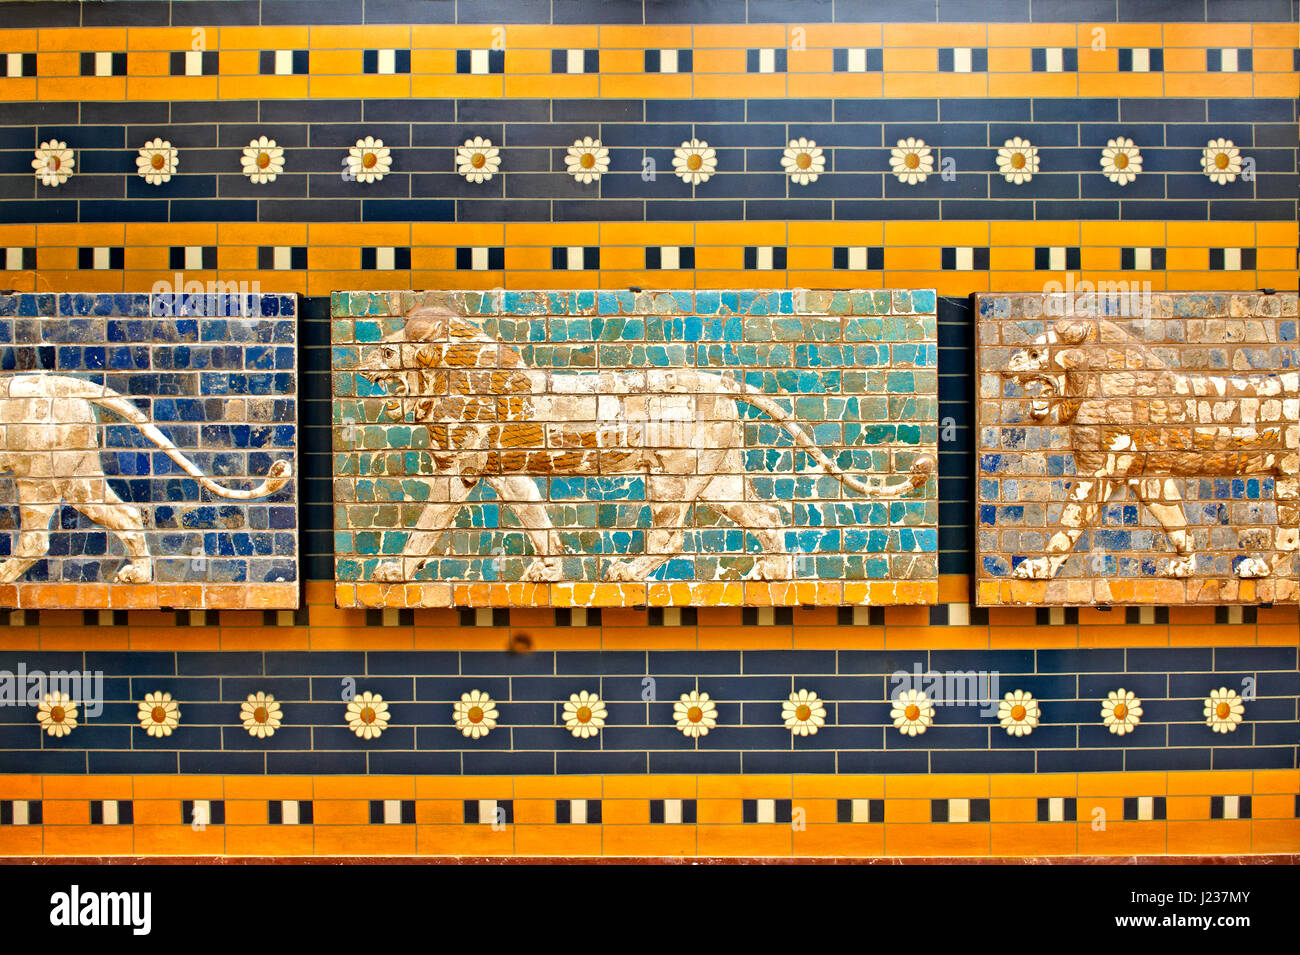 Lion relief on glazed bricks from the Ishtar Gate, Babylon, Iraq constructed in about 575 BC,  Istanbul Archaeological Museum. Stock Photo